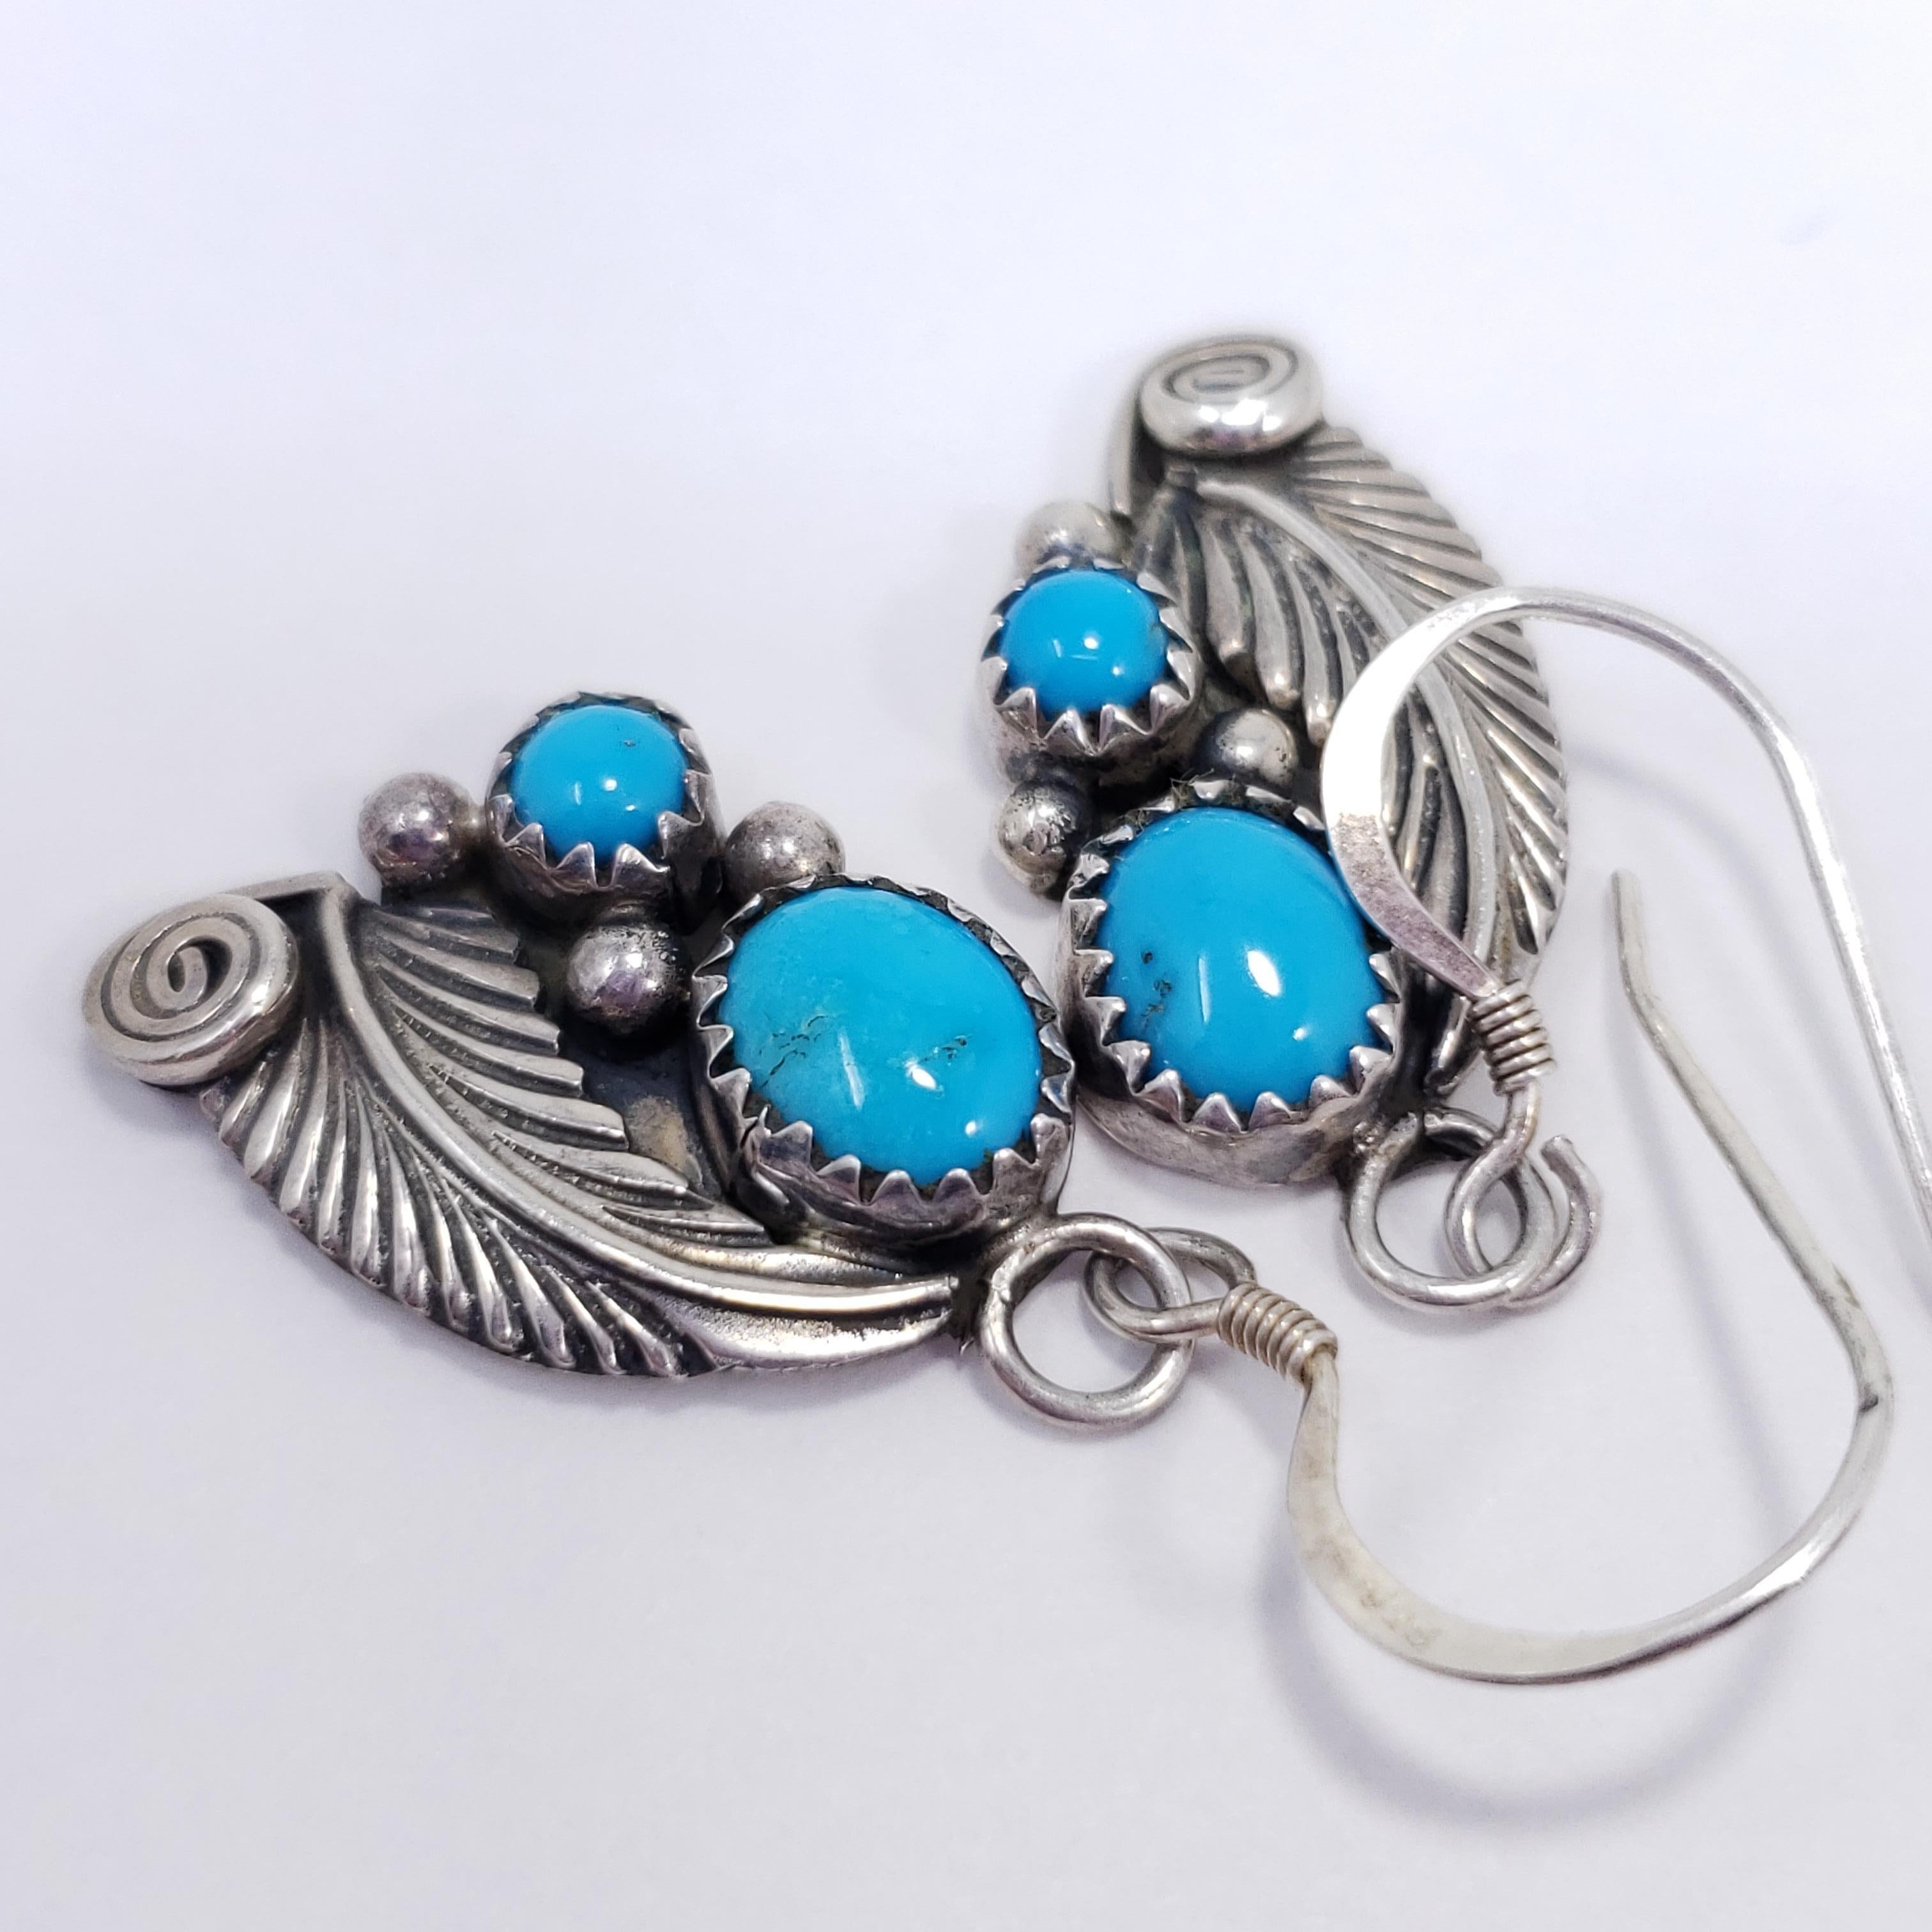 A pair of handmade Native American feather-themed earrings, each featuring a pair of vibrant turquoise cabochons in a sterling silver setting. 

Circa late 20th century. 

Marks / hallmarks / etc:  Sterling, H